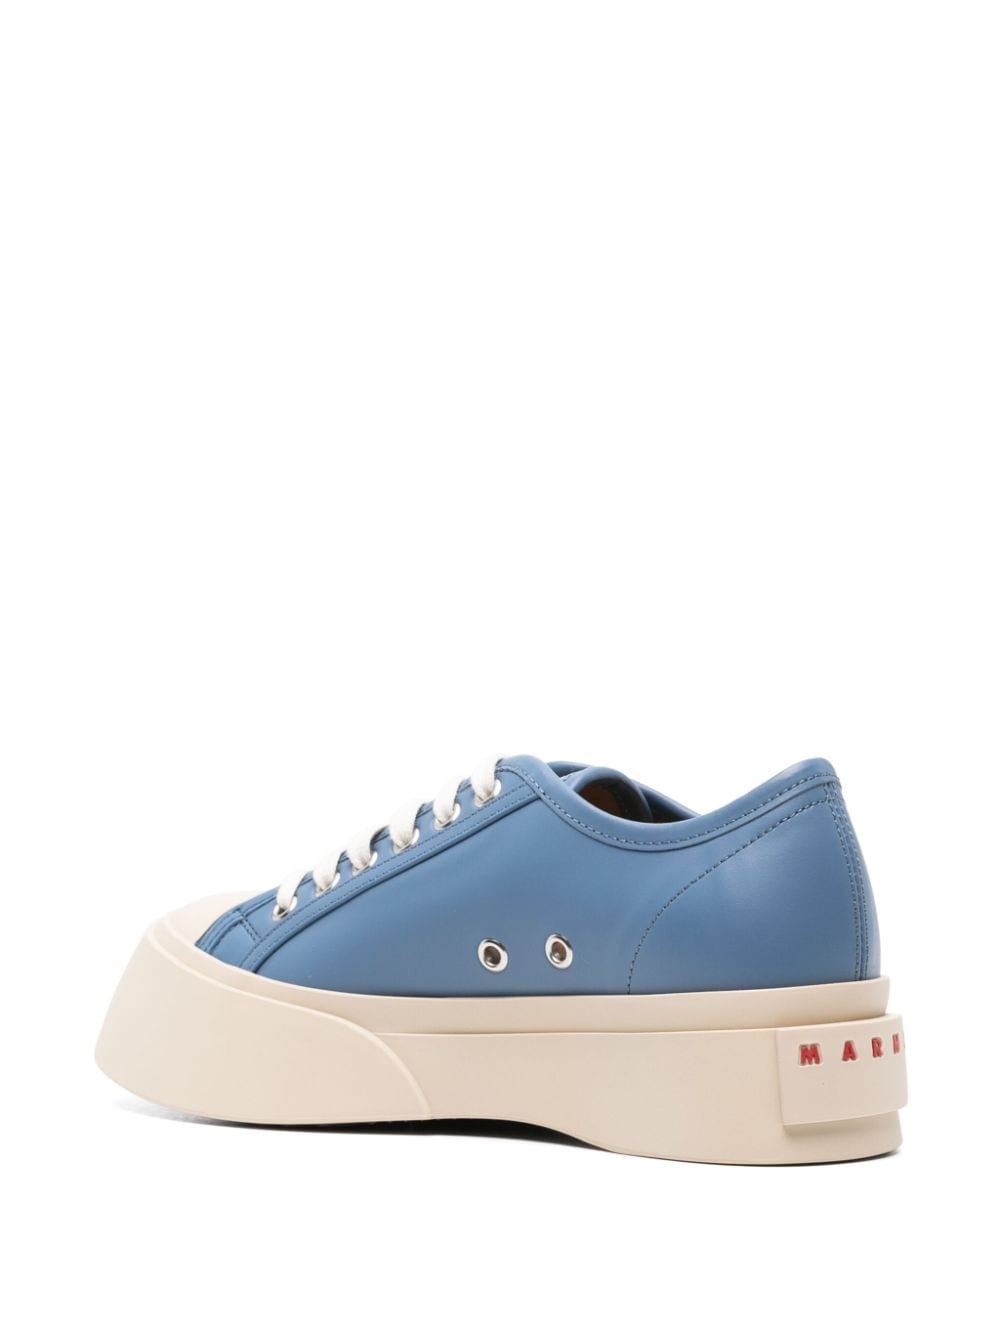 Pablo leather sneakers - 3